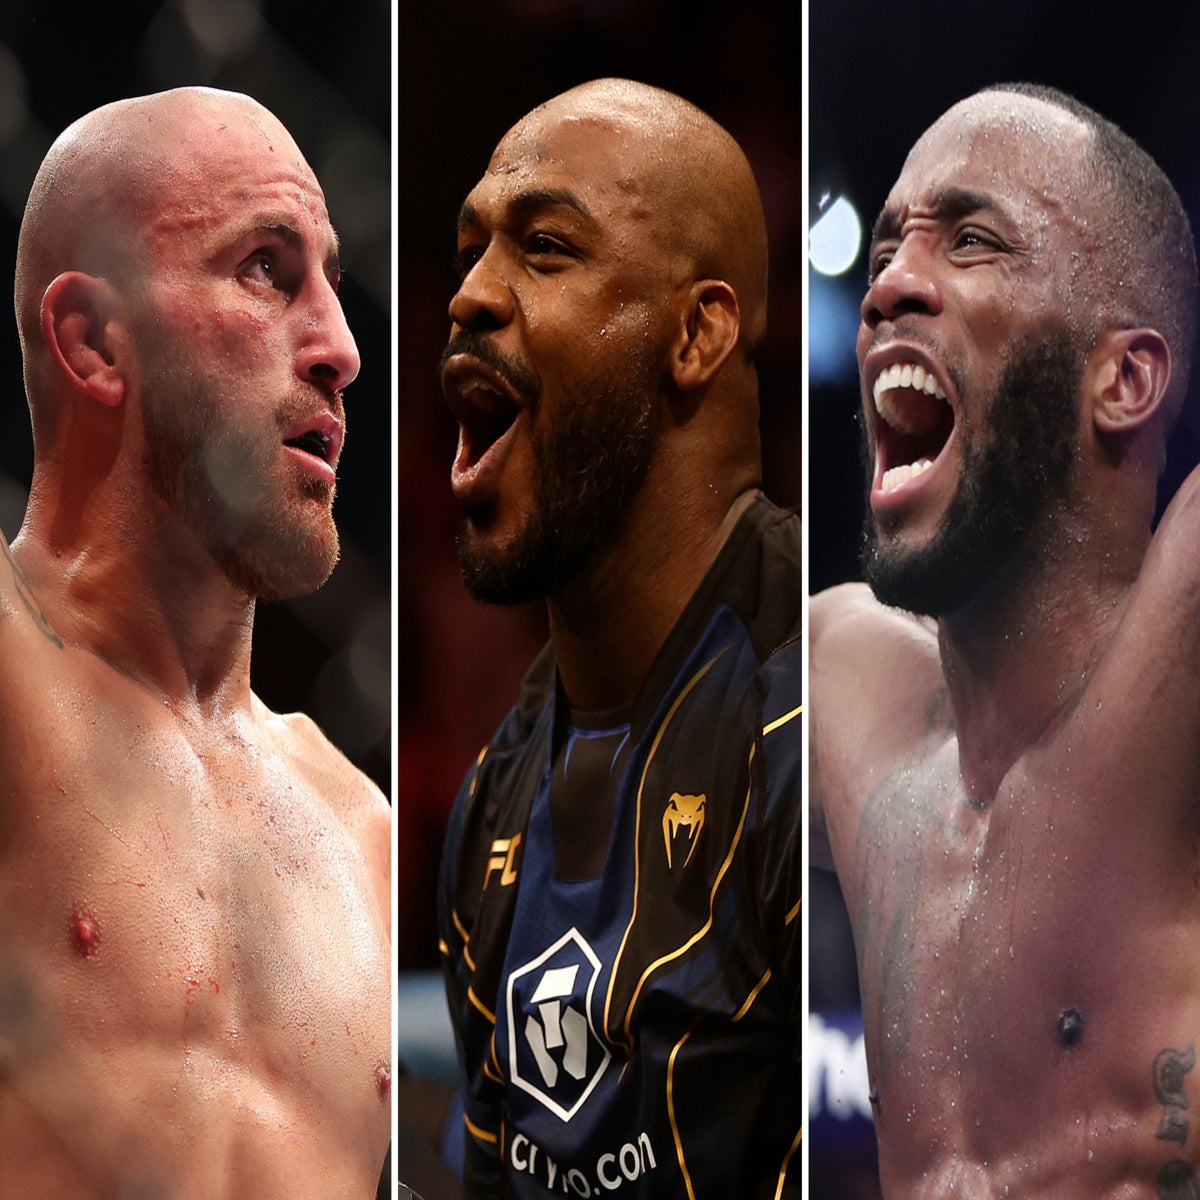 10 Of The Most Exciting MMA Fighters To Watch Today